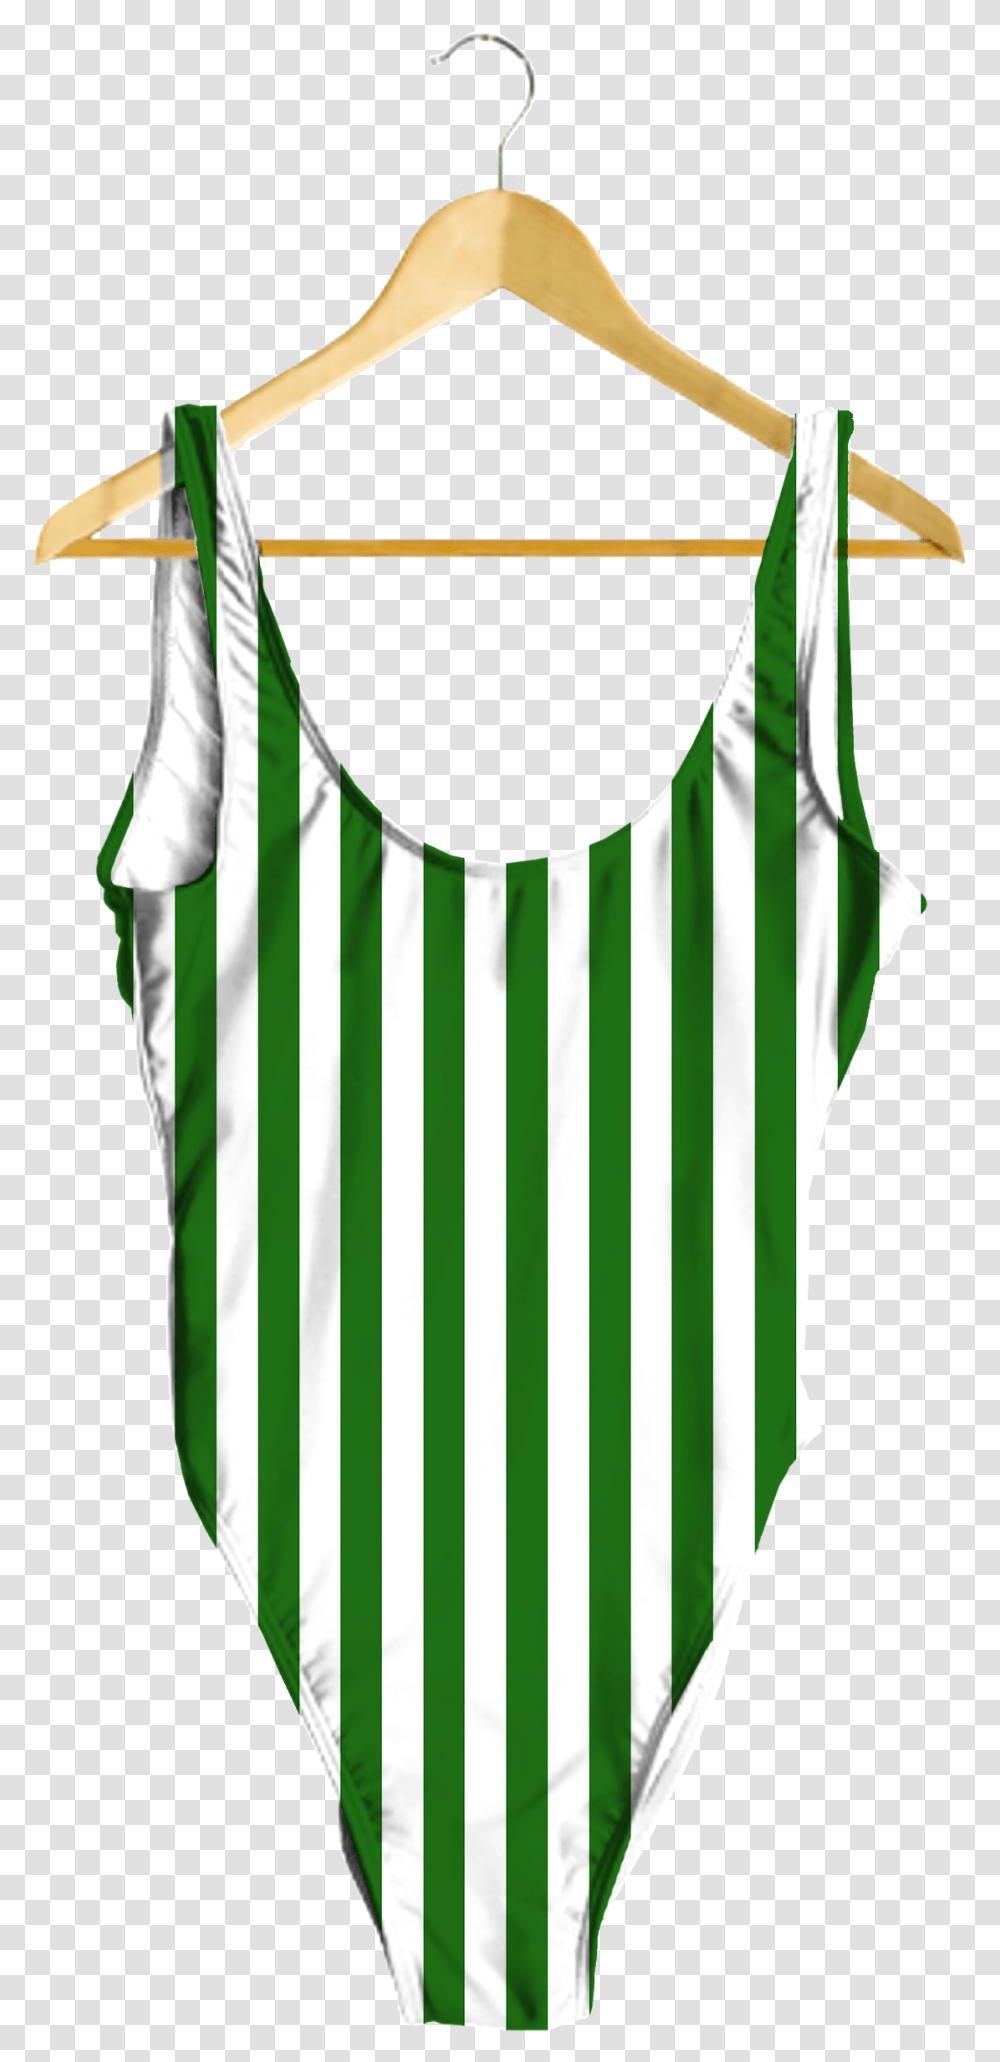 Green Amp White Striped One Piece Green And White Striped One Piece Swimsuit, Apparel, Undershirt, Tank Top Transparent Png